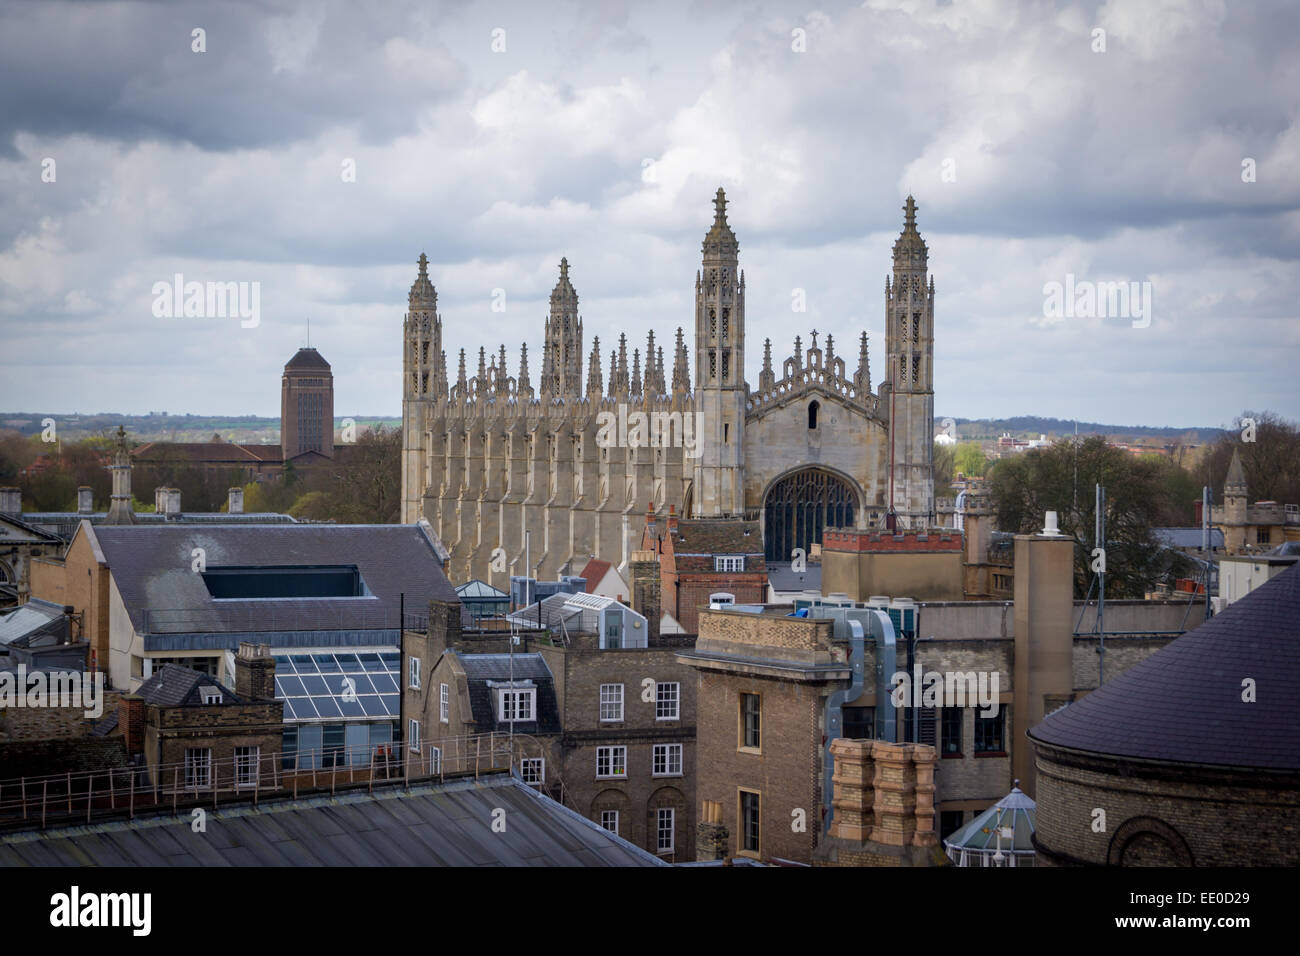 King's College Chapel viewed over Cambridge rooftops Stock Photo